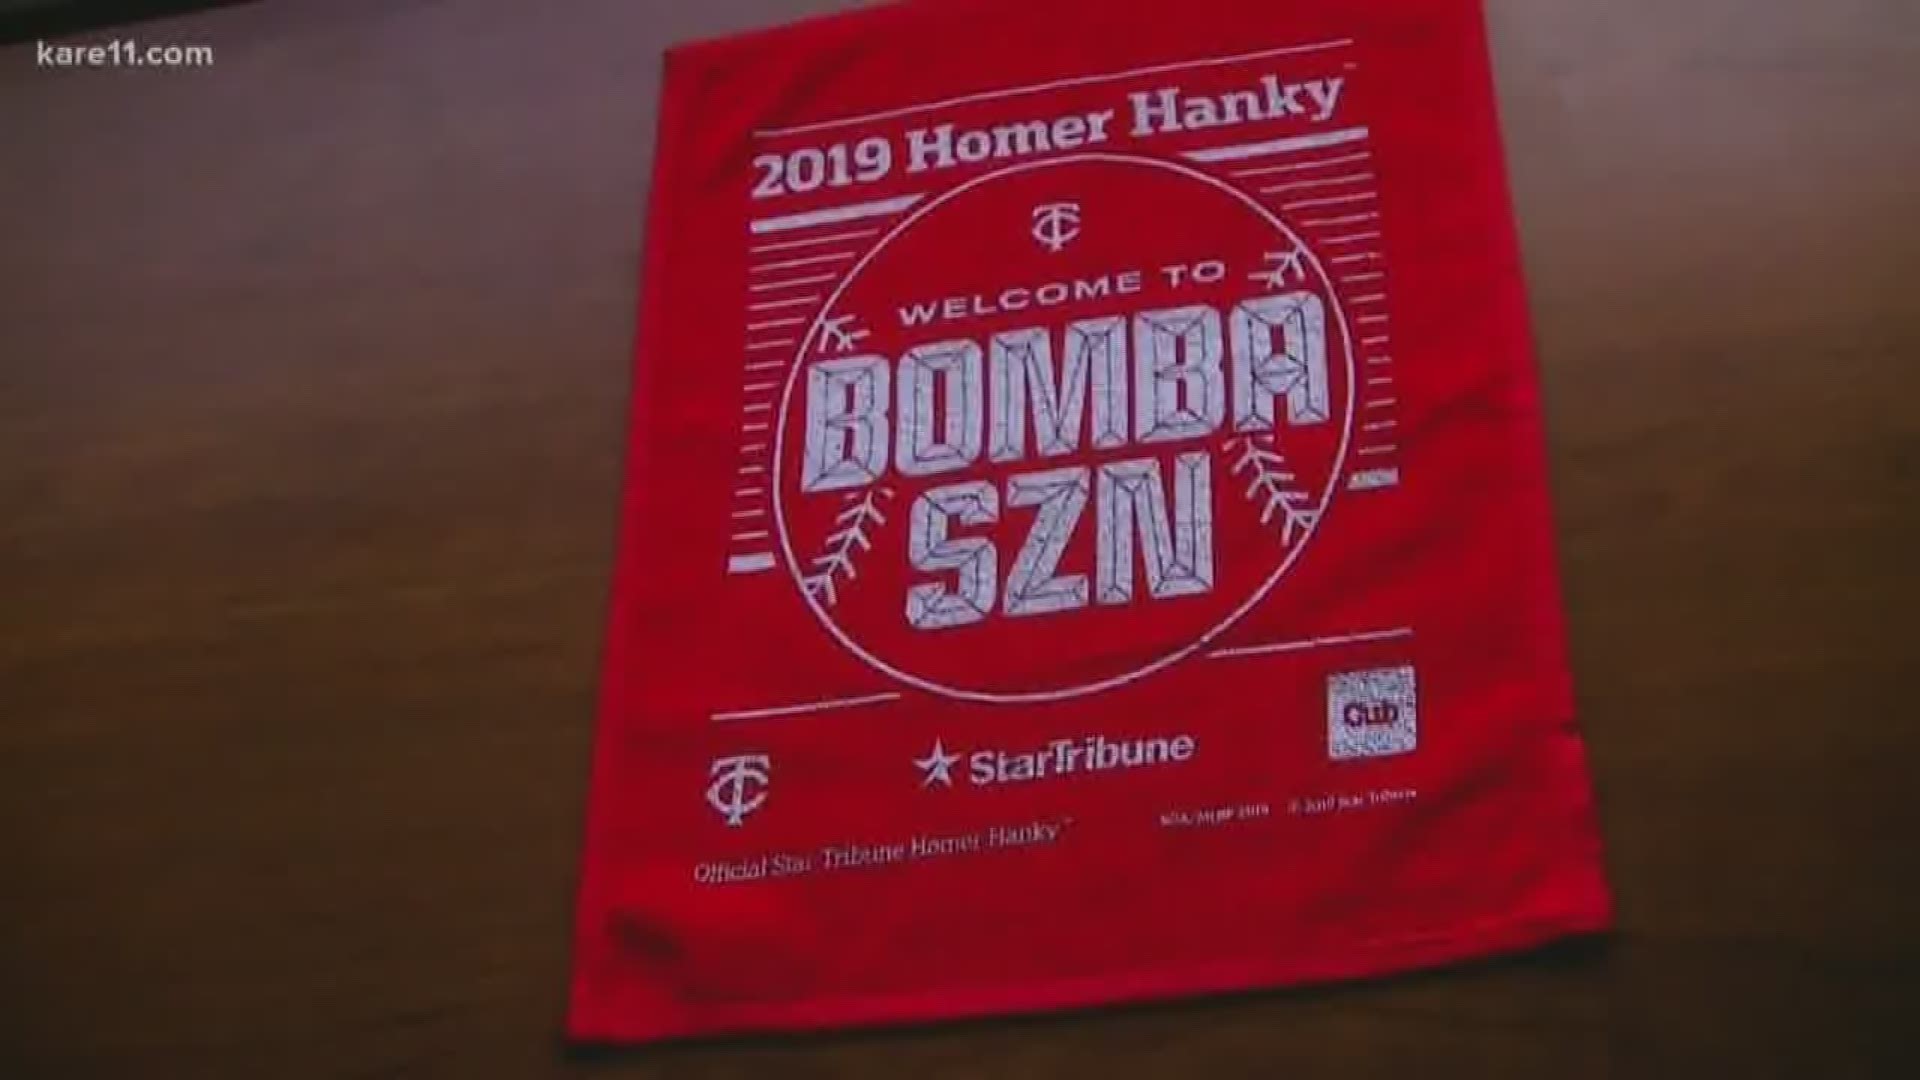 The redesigned Hanky is a new color for 2019, and welcomes fans to 'Bomba Szn.'